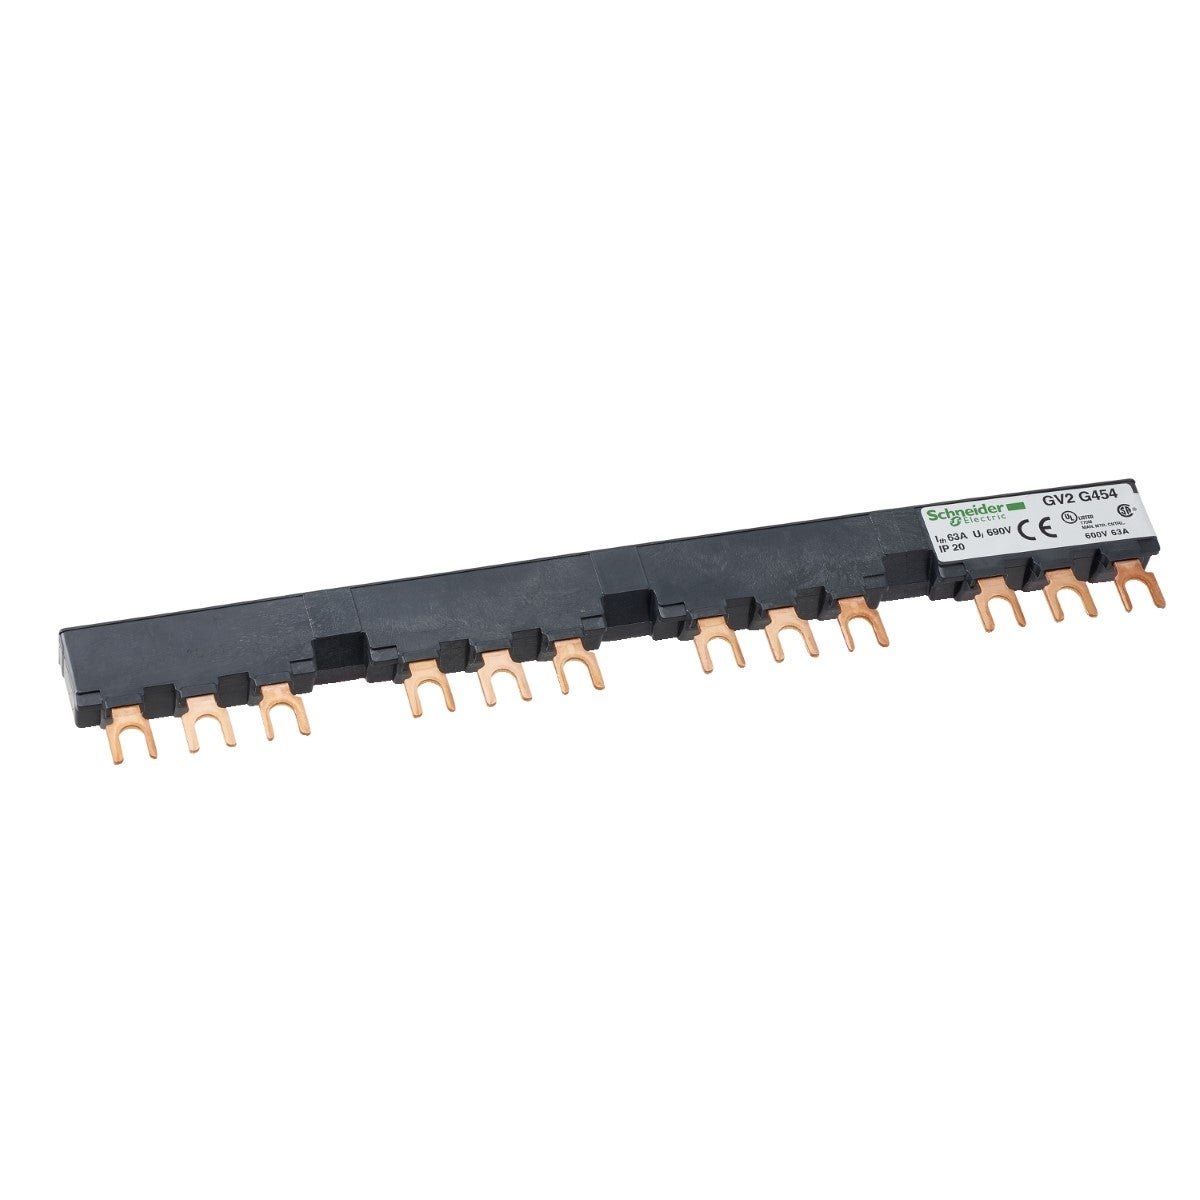 Linergy FT, Comb busbar, 63A, 4 tap-offs, 54mm pitch